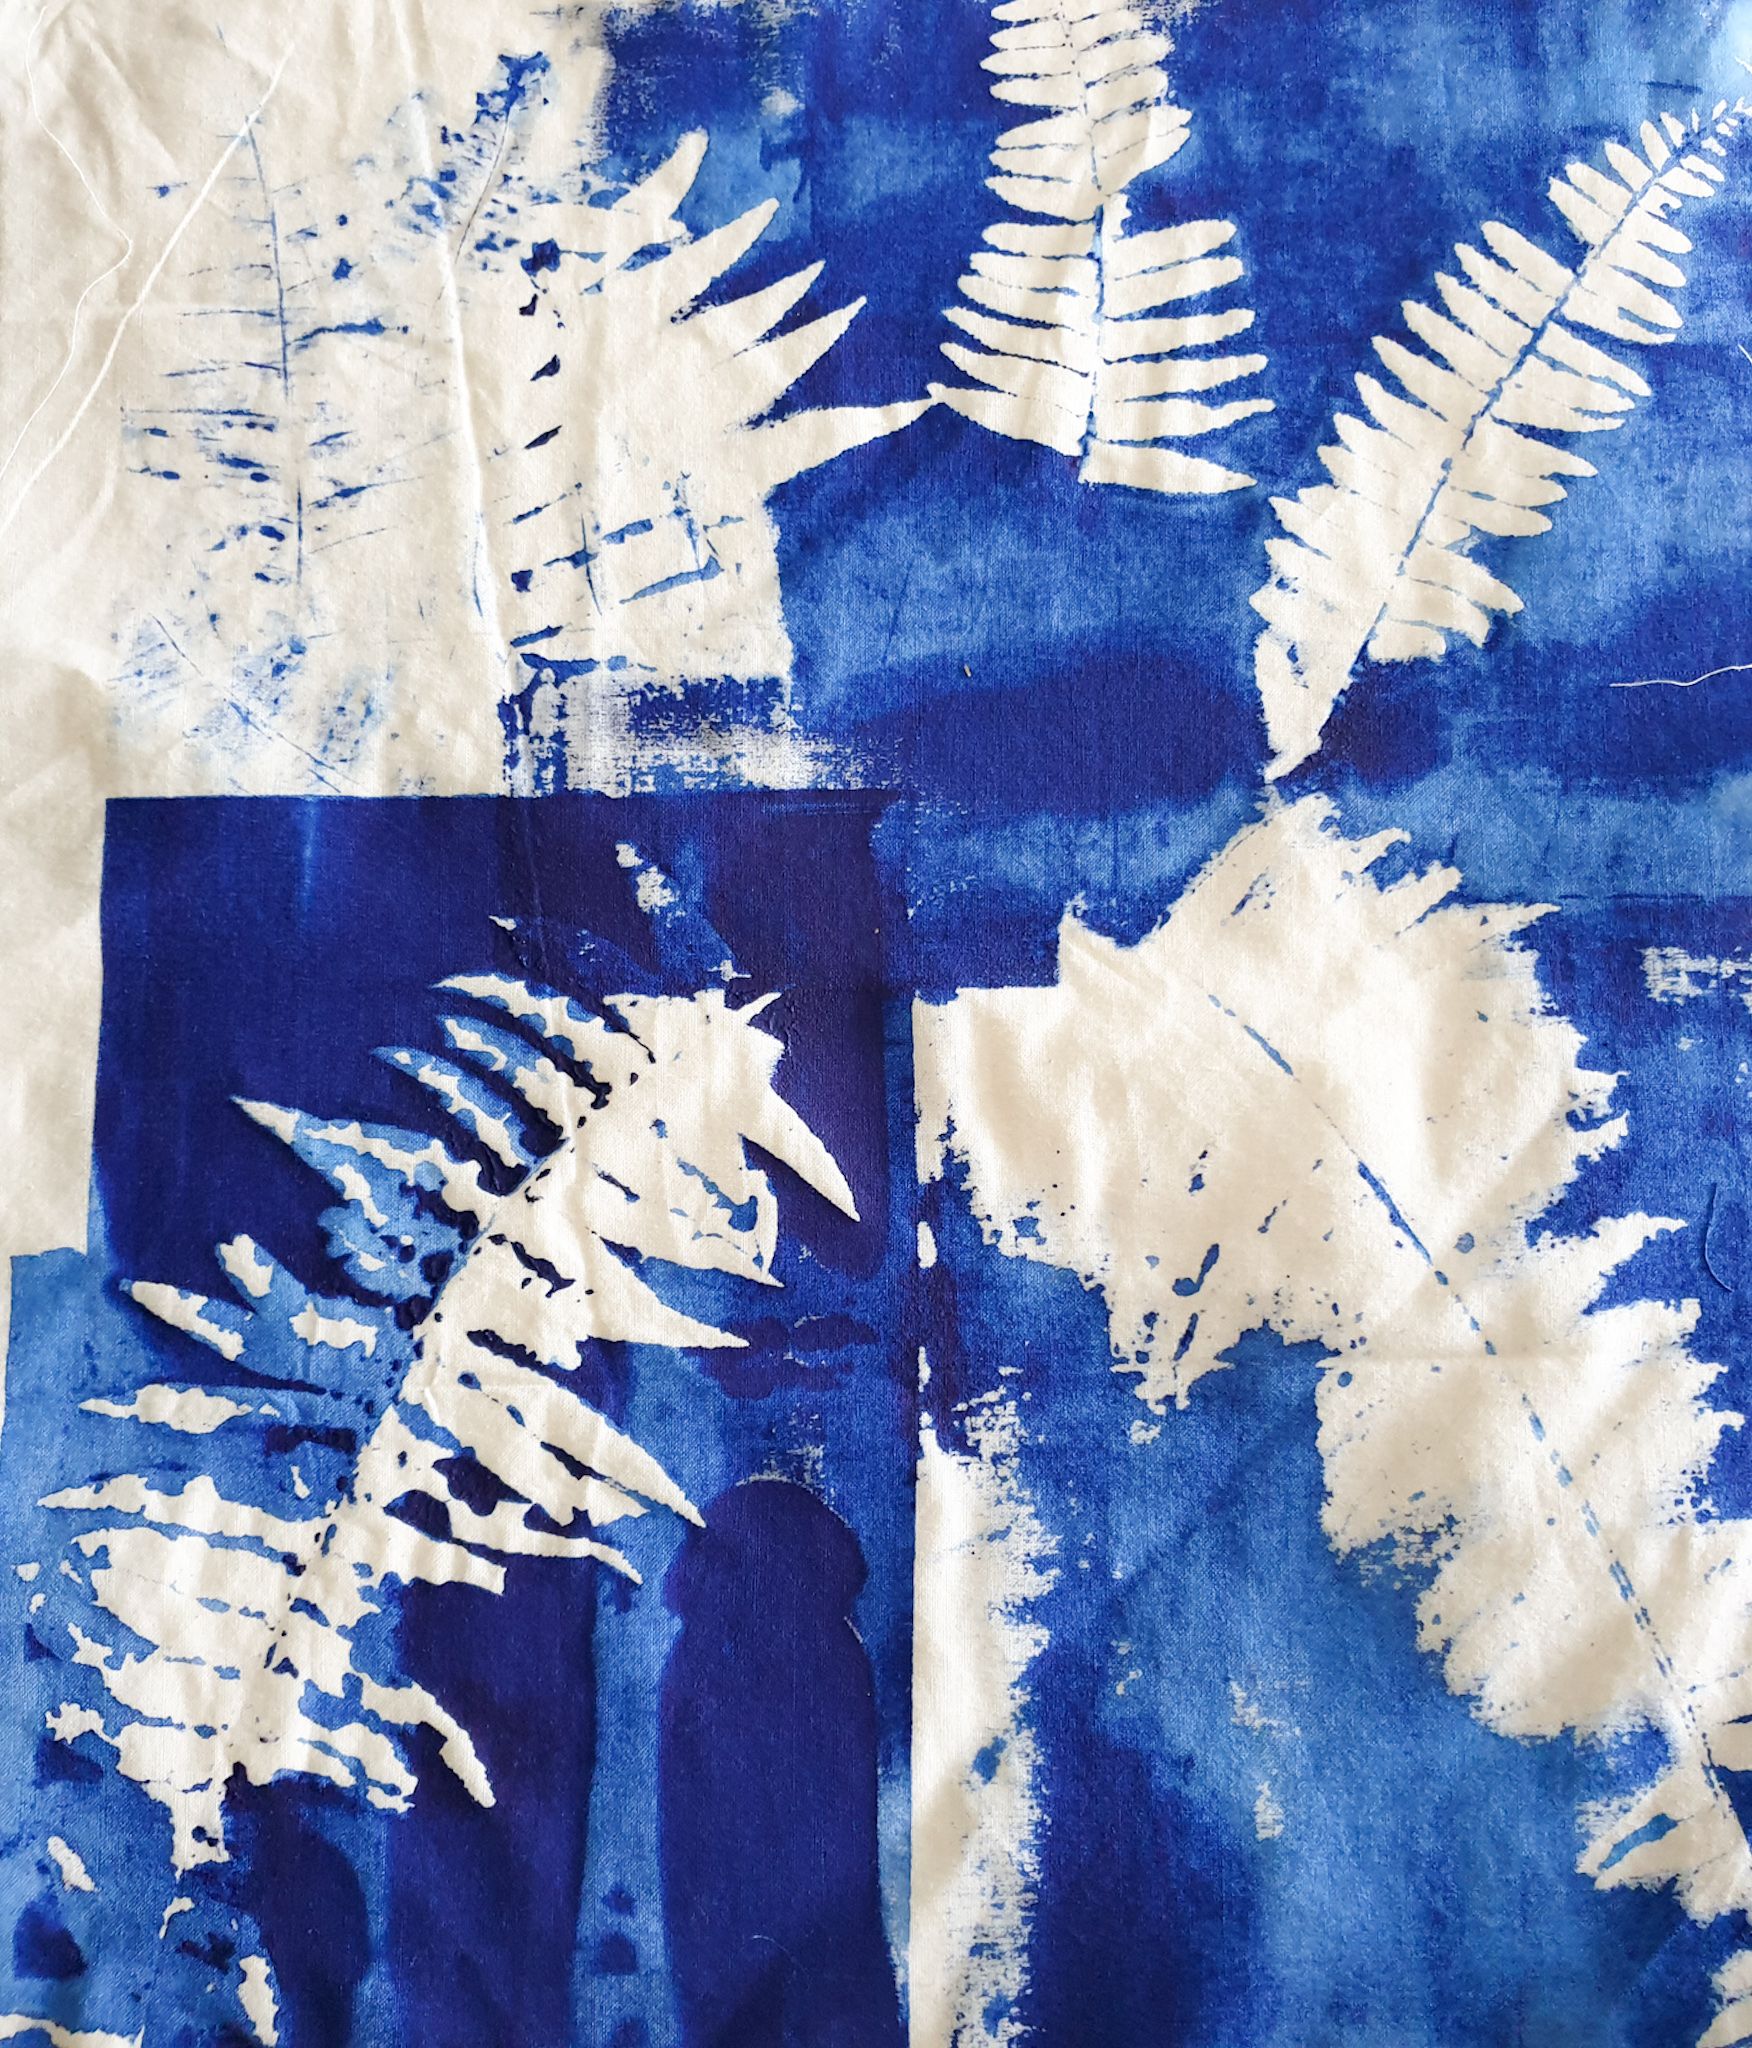 Used ferns for screen print